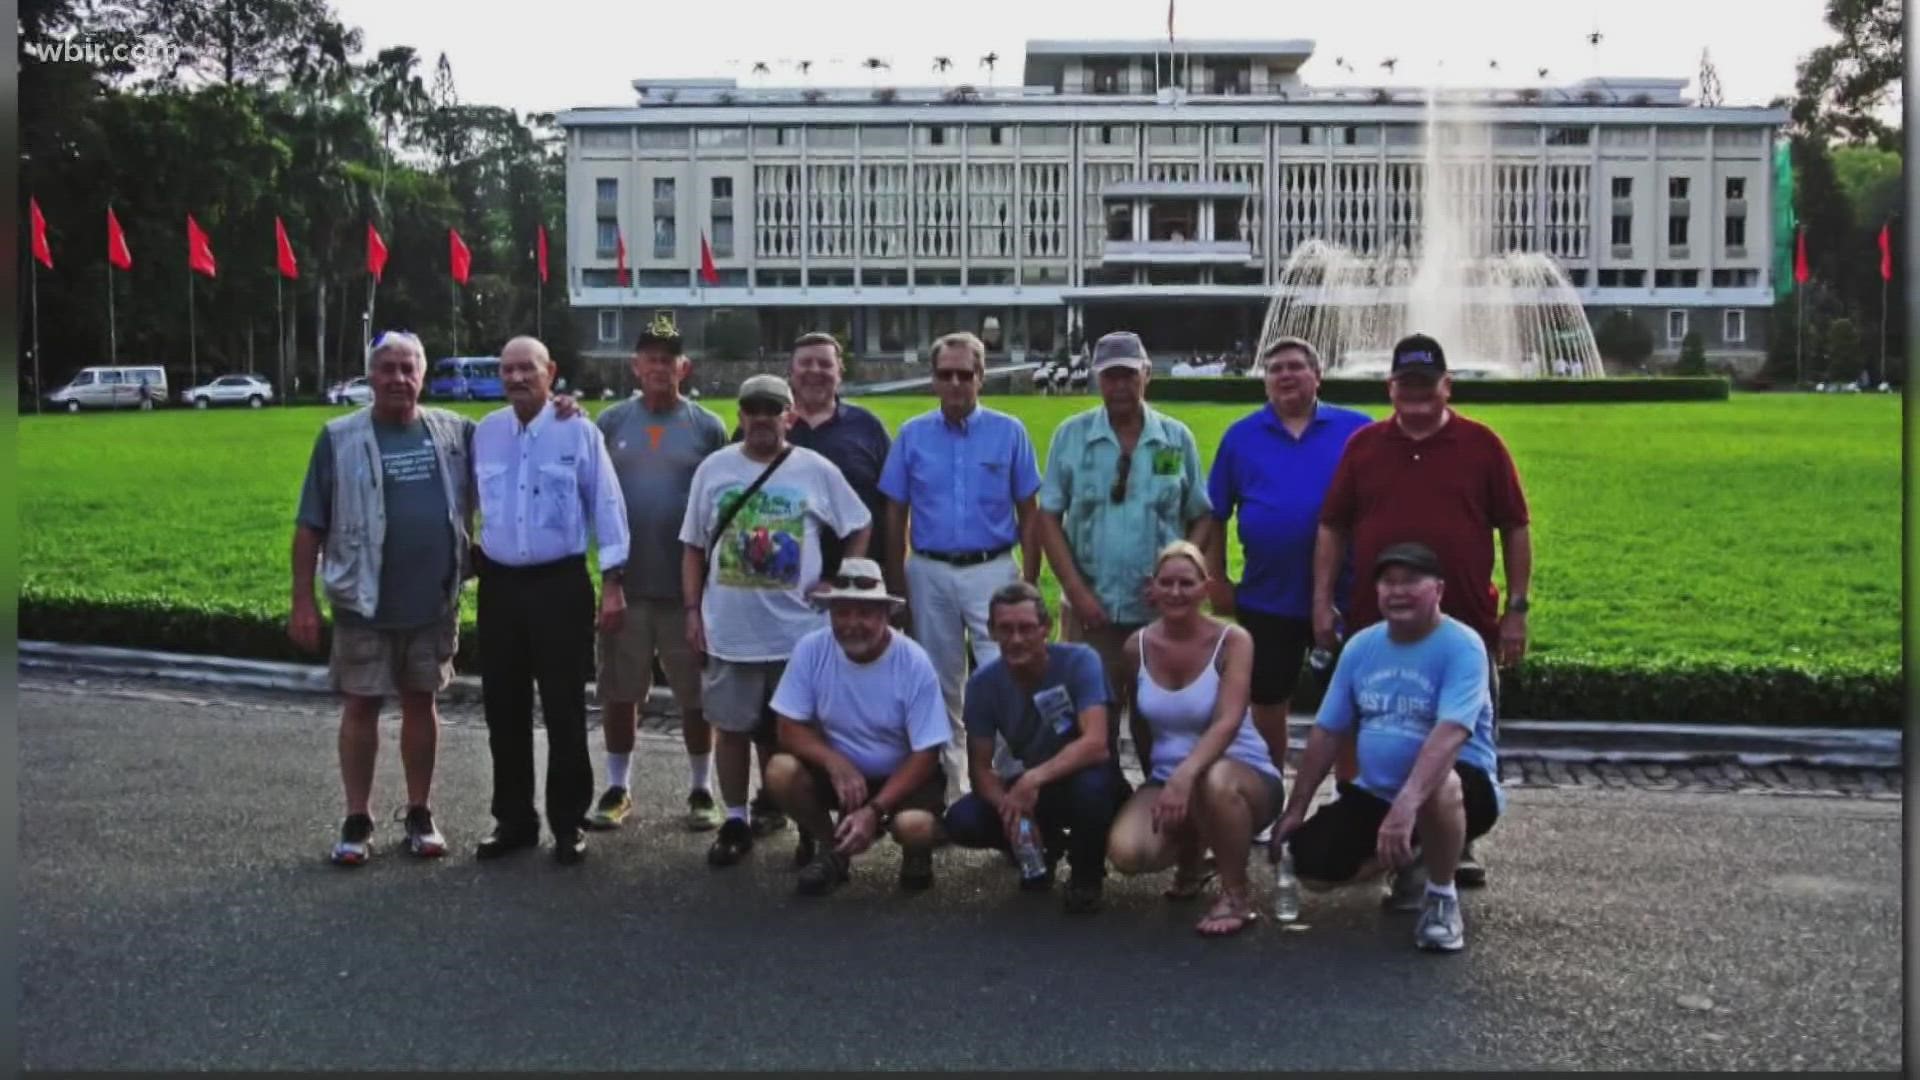 We reconnect with a group of Vietnam veterans after their 2017 journey to a country they first saw 50 years ago at war.